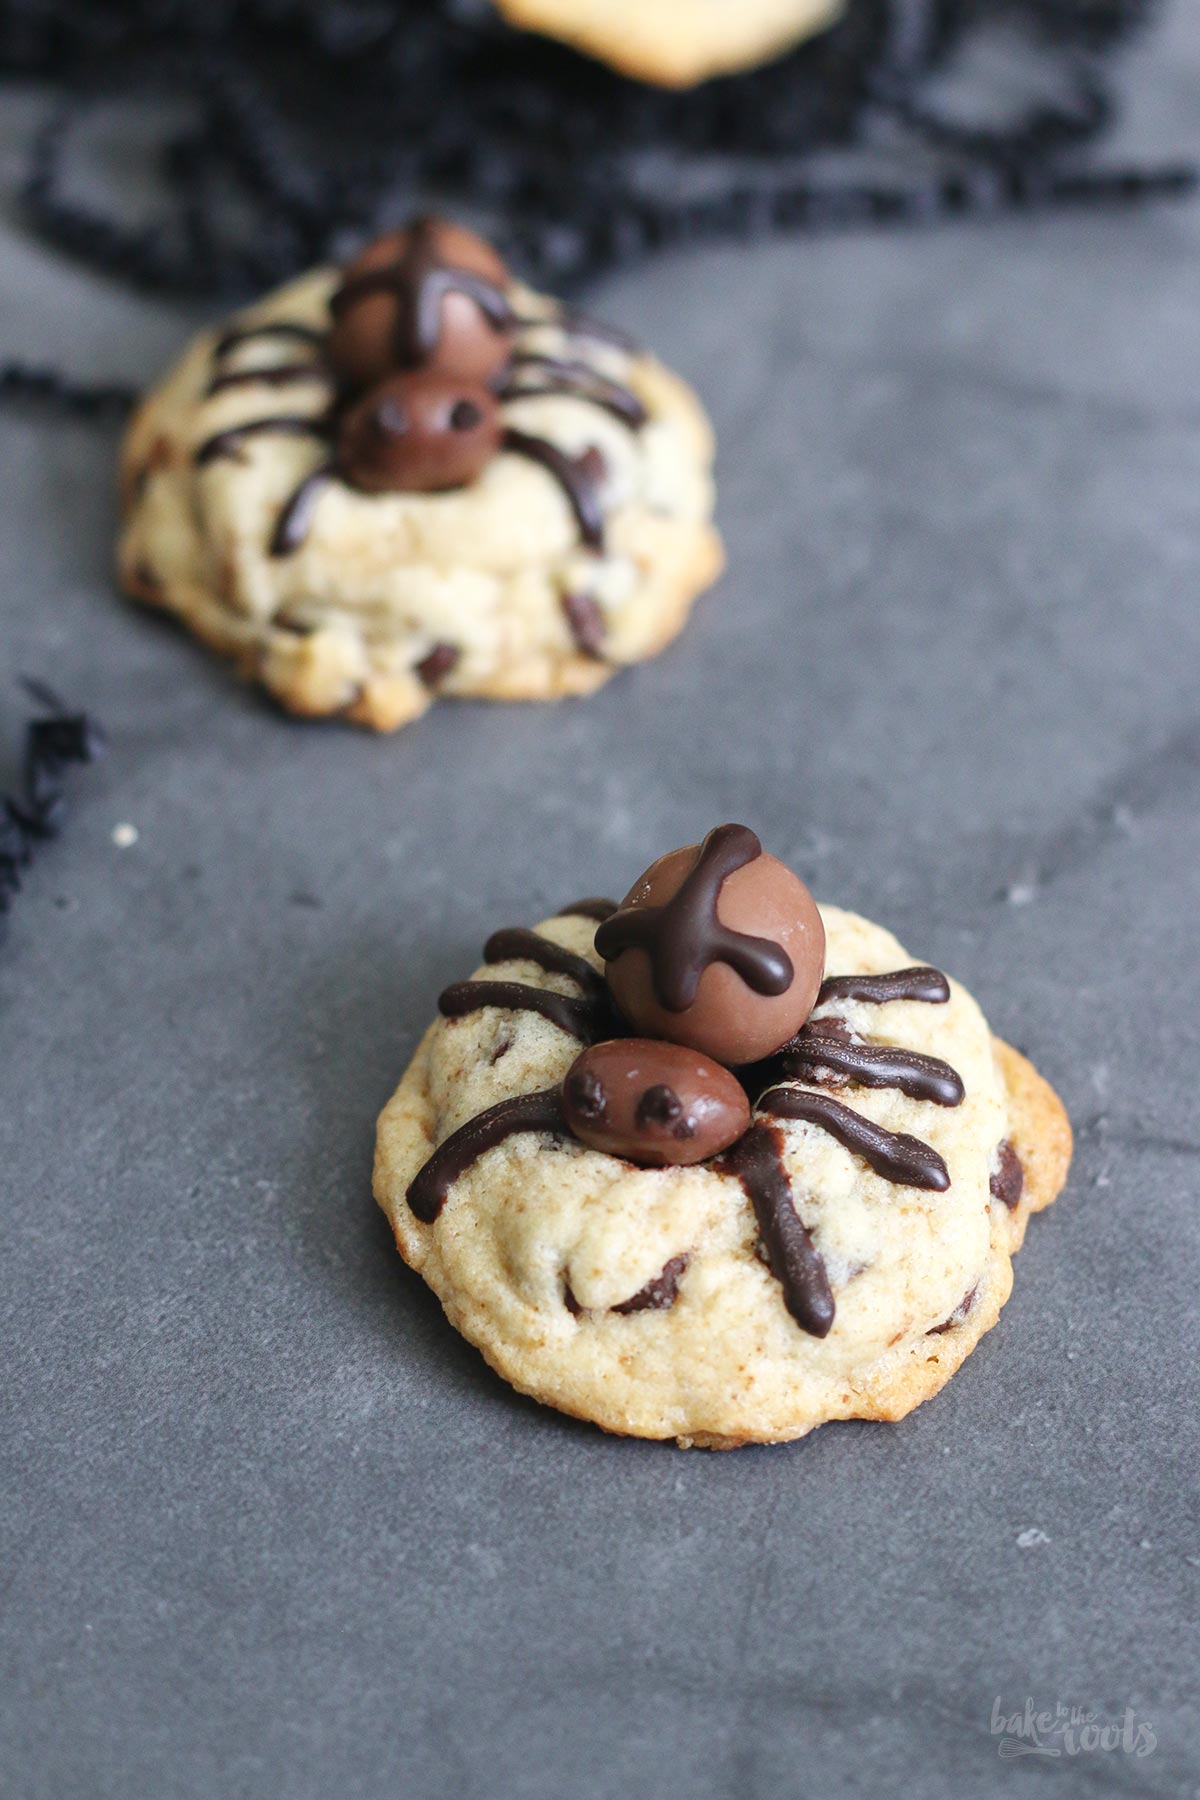 Spider Chocolate Chip Cookies | Bake to the roots